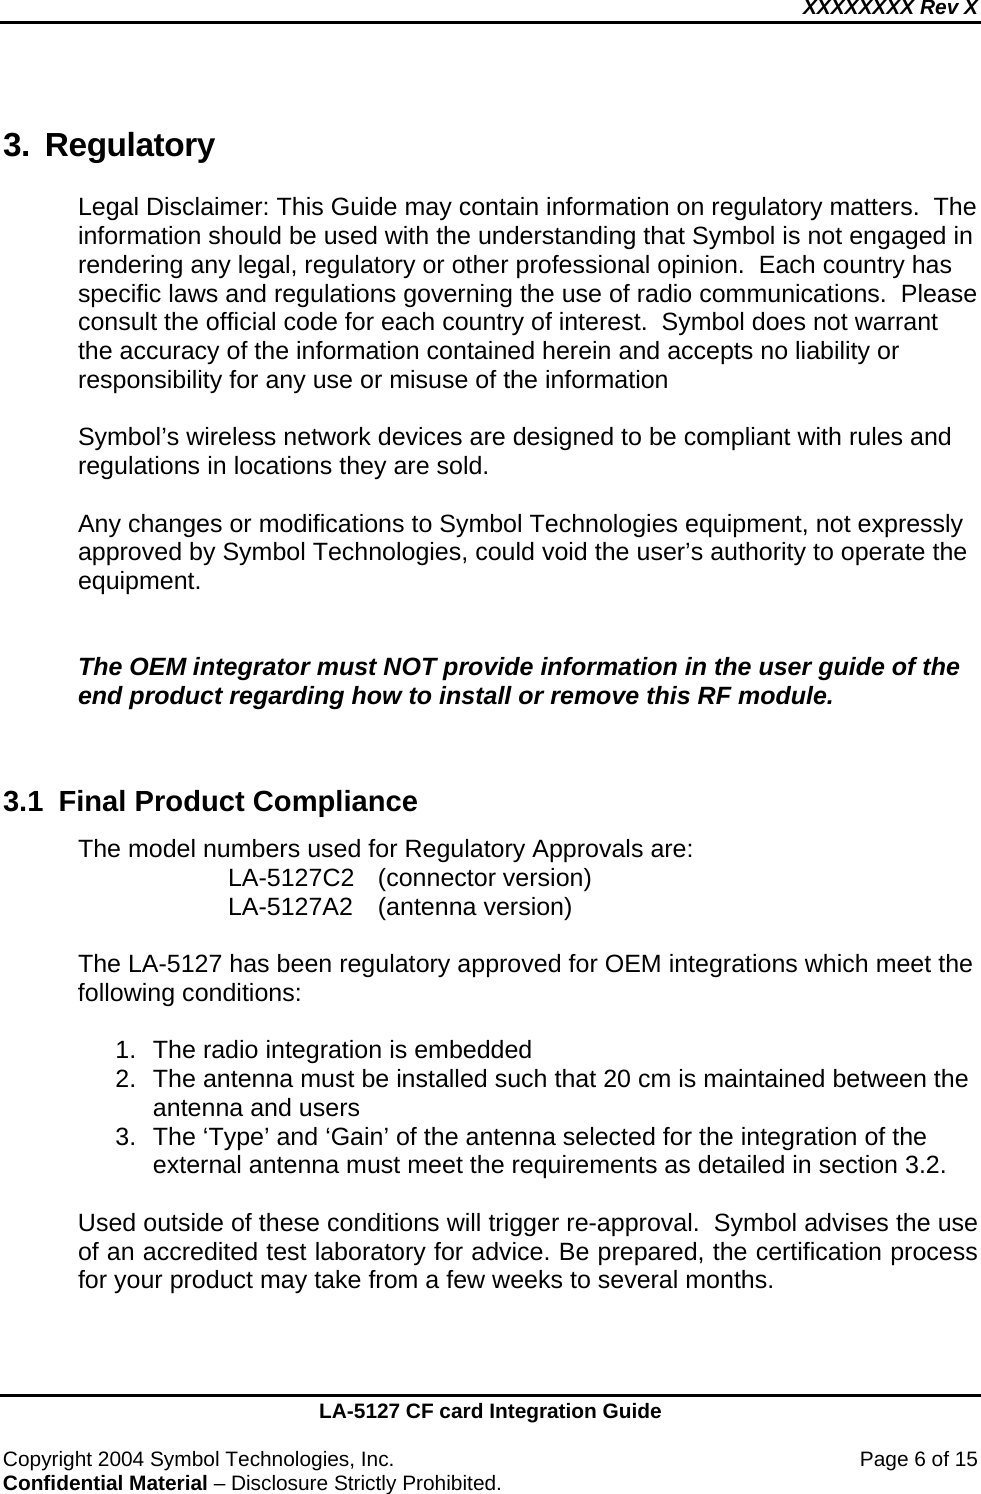 XXXXXXXX Rev X    LA-5127 CF card Integration Guide  Copyright 2004 Symbol Technologies, Inc.    Page 6 of 15 Confidential Material – Disclosure Strictly Prohibited. 3. Regulatory Legal Disclaimer: This Guide may contain information on regulatory matters.  The information should be used with the understanding that Symbol is not engaged in rendering any legal, regulatory or other professional opinion.  Each country has specific laws and regulations governing the use of radio communications.  Please consult the official code for each country of interest.  Symbol does not warrant the accuracy of the information contained herein and accepts no liability or responsibility for any use or misuse of the information  Symbol’s wireless network devices are designed to be compliant with rules and regulations in locations they are sold.   Any changes or modifications to Symbol Technologies equipment, not expressly approved by Symbol Technologies, could void the user’s authority to operate the equipment.   The OEM integrator must NOT provide information in the user guide of the end product regarding how to install or remove this RF module.   3.1  Final Product Compliance The model numbers used for Regulatory Approvals are: LA-5127C2 (connector version)  LA-5127A2 (antenna version)  The LA-5127 has been regulatory approved for OEM integrations which meet the following conditions:  1.  The radio integration is embedded 2.  The antenna must be installed such that 20 cm is maintained between the antenna and users 3.  The ‘Type’ and ‘Gain’ of the antenna selected for the integration of the external antenna must meet the requirements as detailed in section 3.2.  Used outside of these conditions will trigger re-approval.  Symbol advises the use of an accredited test laboratory for advice. Be prepared, the certification process for your product may take from a few weeks to several months.   